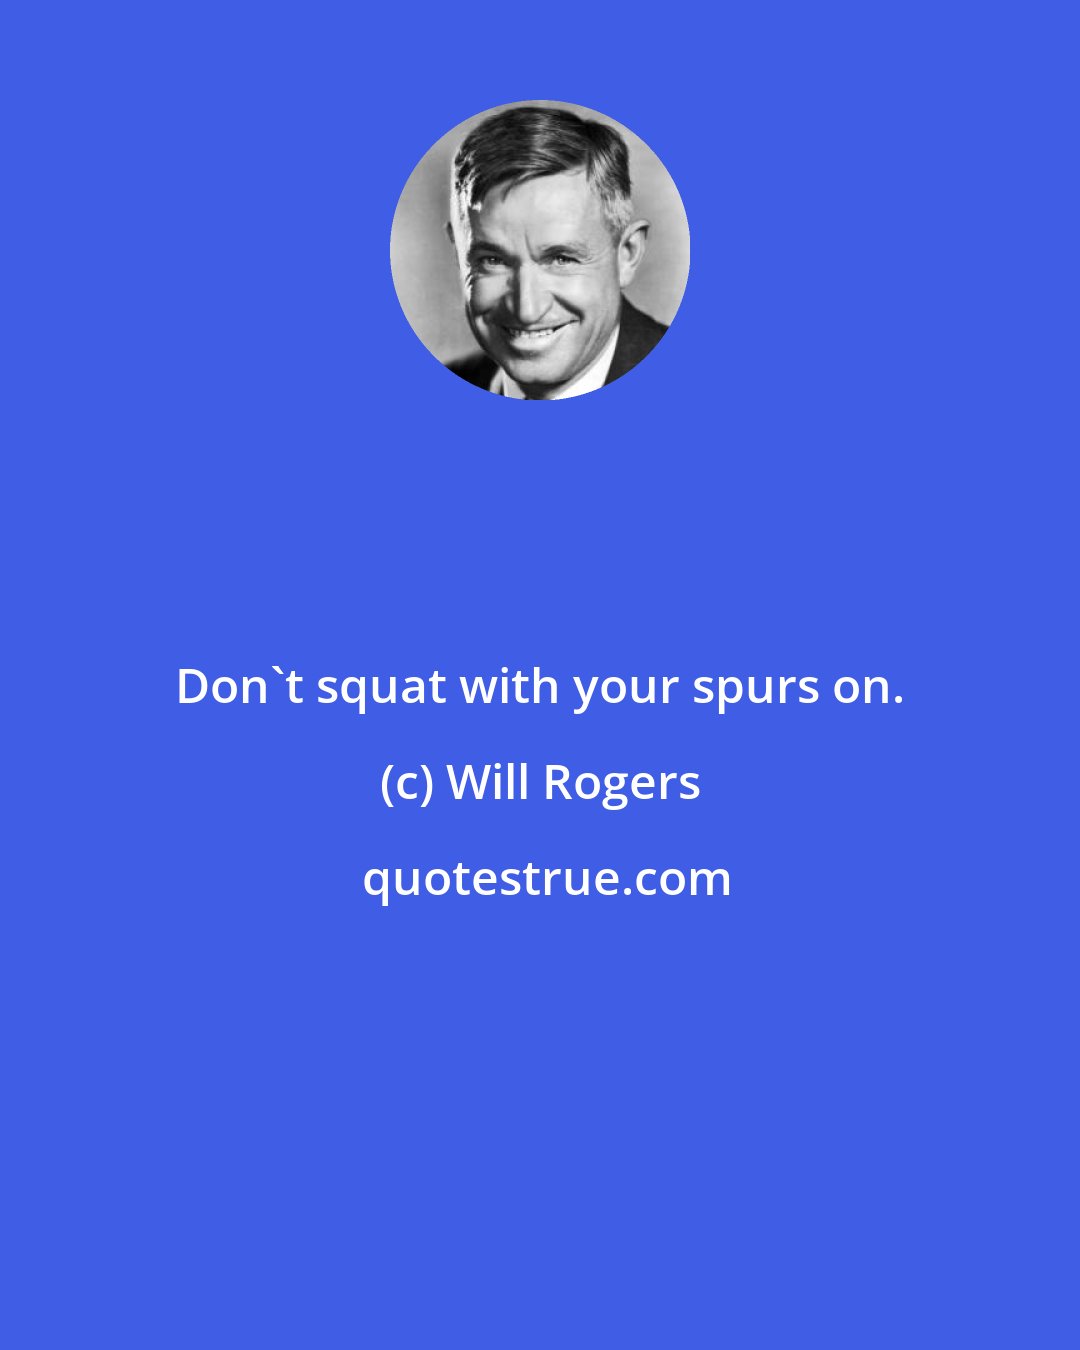 Will Rogers: Don't squat with your spurs on.